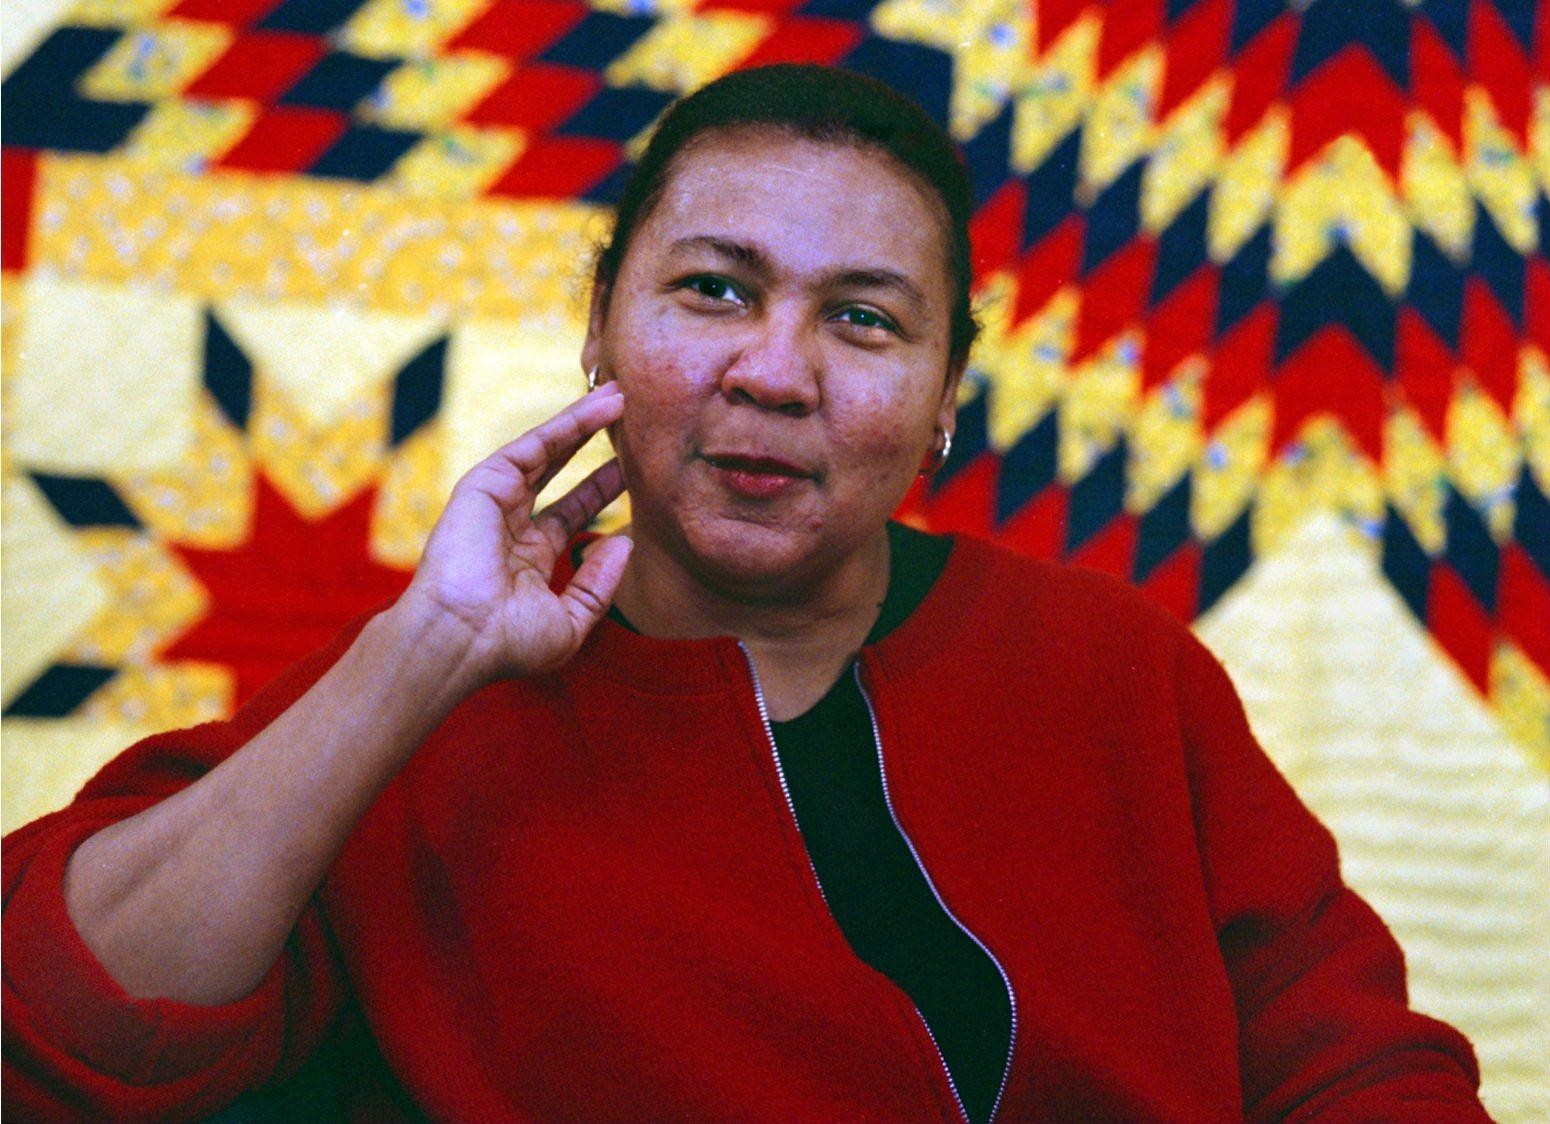 01/20/99 Black feminist Bell Hooks during interview for her new book. Said the feminist writer who argues against all racial, class or gender stereotyping, 'Don't take my picture so close up. That's what White photographers do.' CREDIT: Margaret Thomas TW (Foto: The Washington Post via Getty Im)